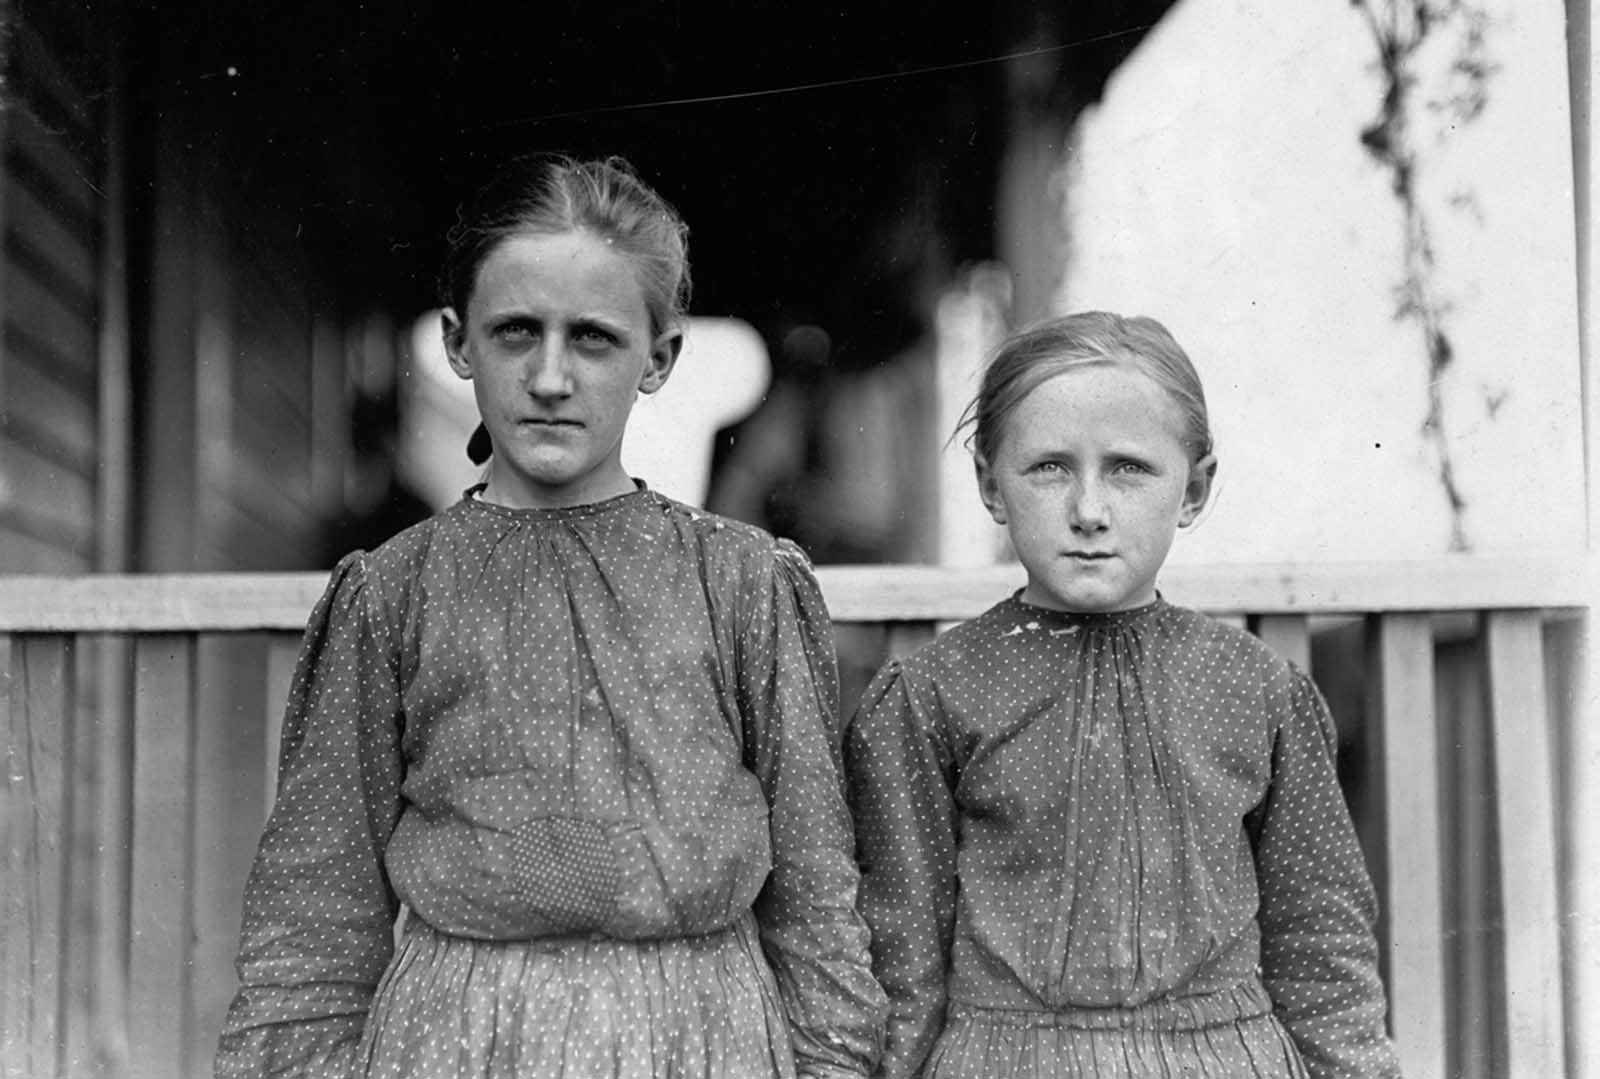 Minnie Carpenter, (left) photographed in November of 1908 at Loray Mill in Gastonia, North Carolina. Minnie makes fifty cents for a 10-hour day as a spinner in the mill. The younger girl works irregularly.